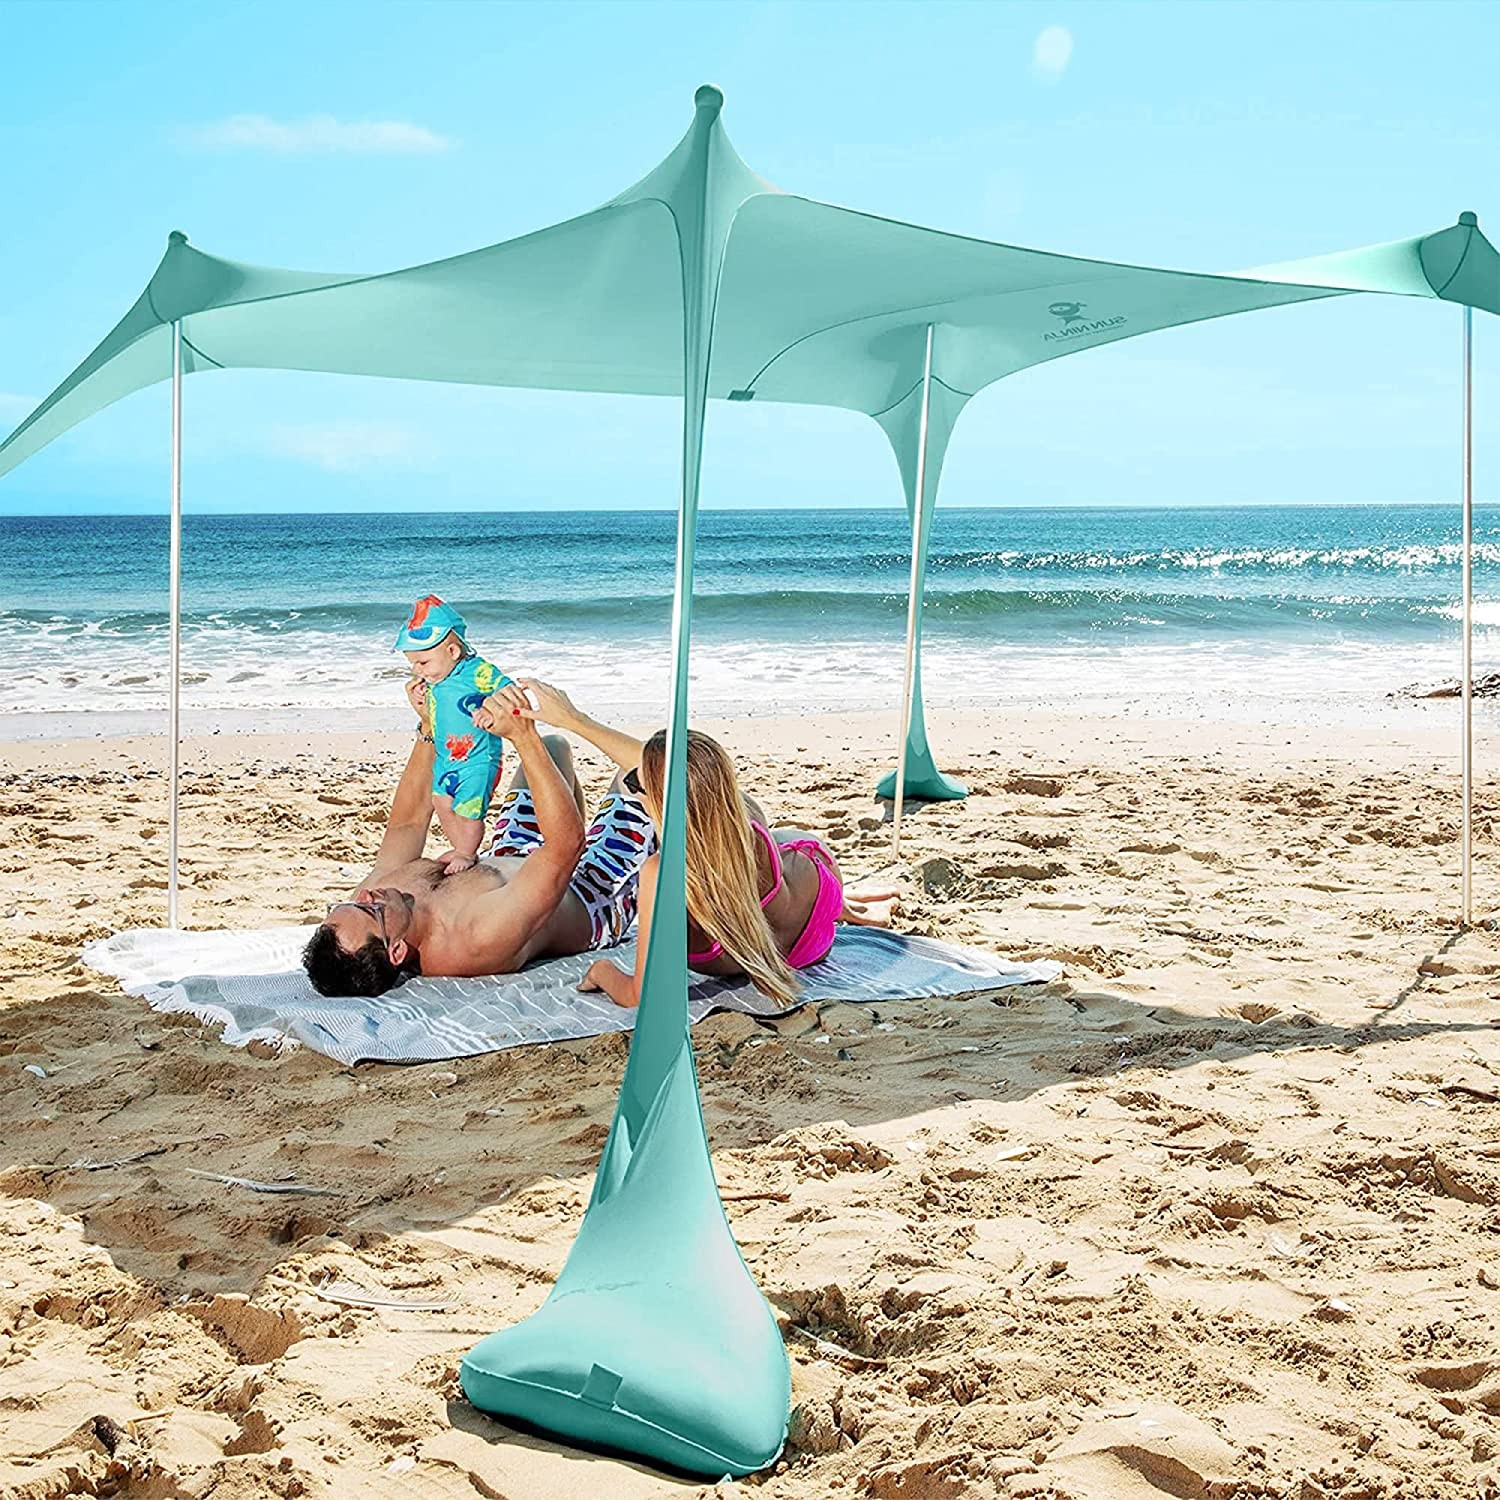 Beach supplies (towels, tent, umbrellas & chairs) included - no need to rent beach service!